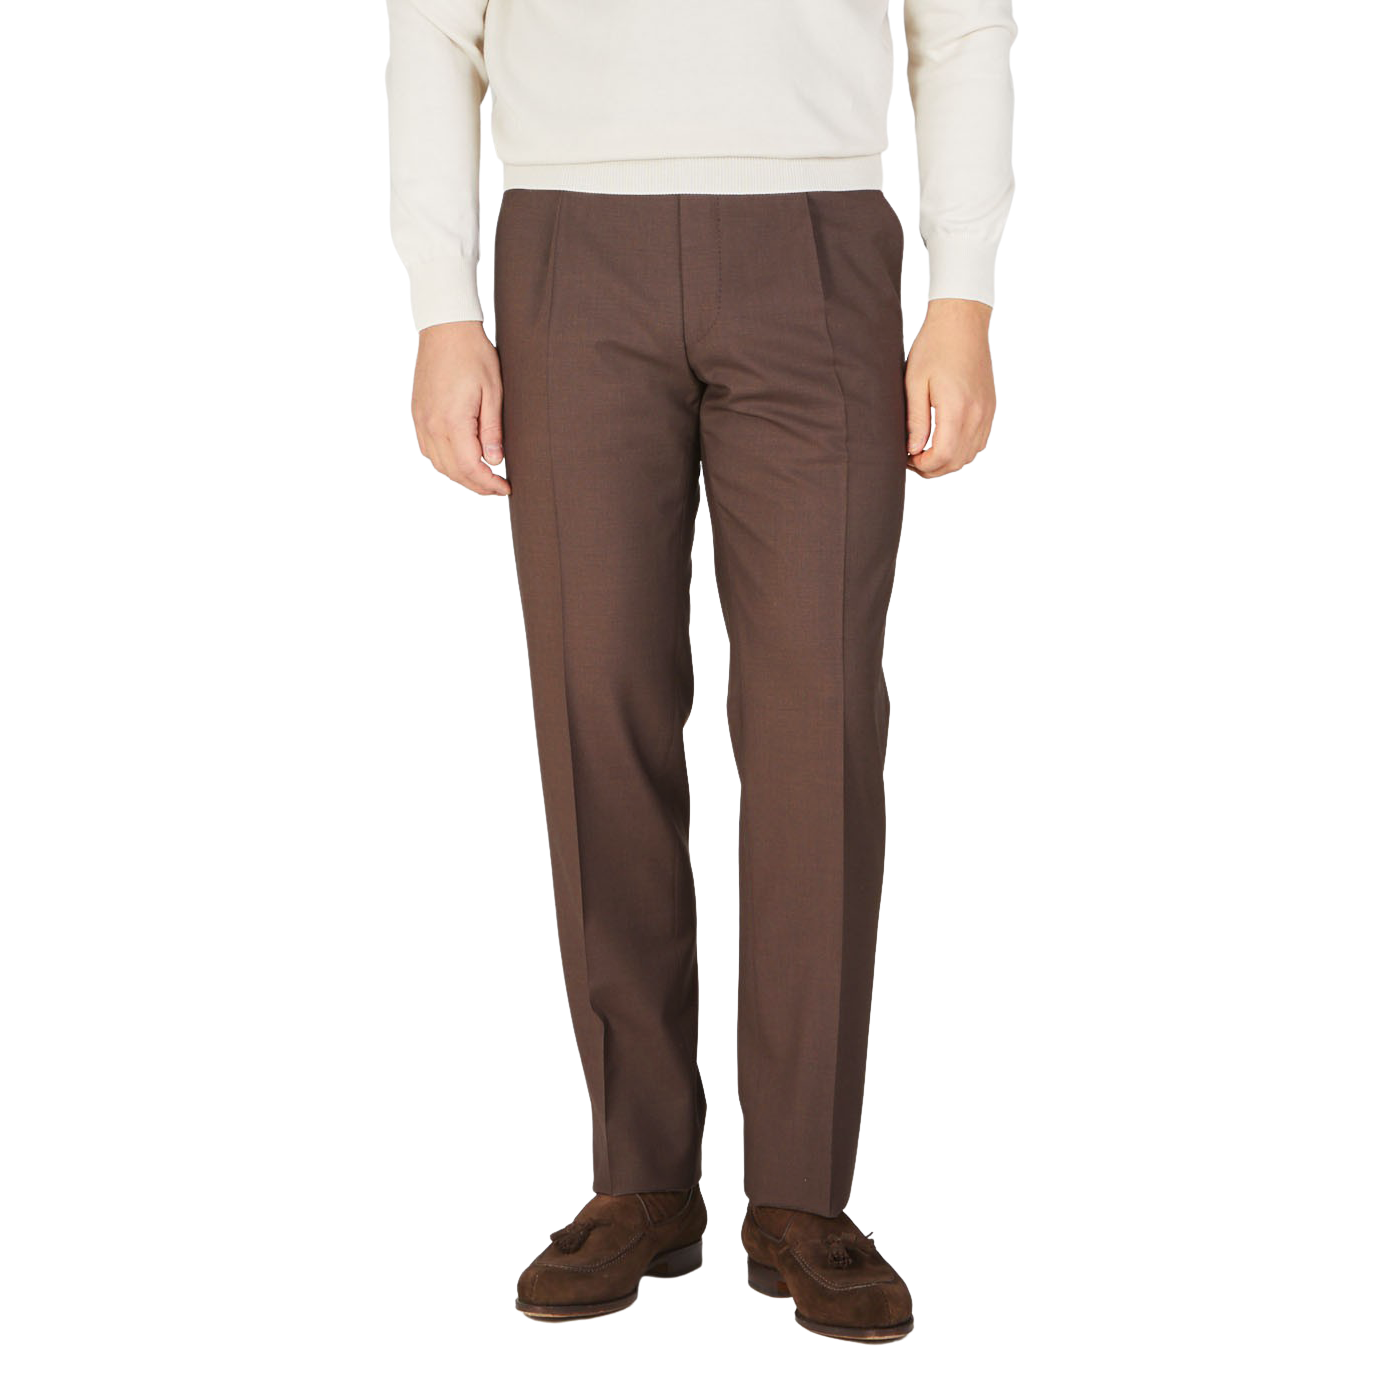 Buy Man Brown Pant, Brown Trouser for Office Wear Brown Pant for Groomsmen, Brown  Trouser for Wedding Work Wear Trouser for Men Gift for Him Online in India  - Etsy